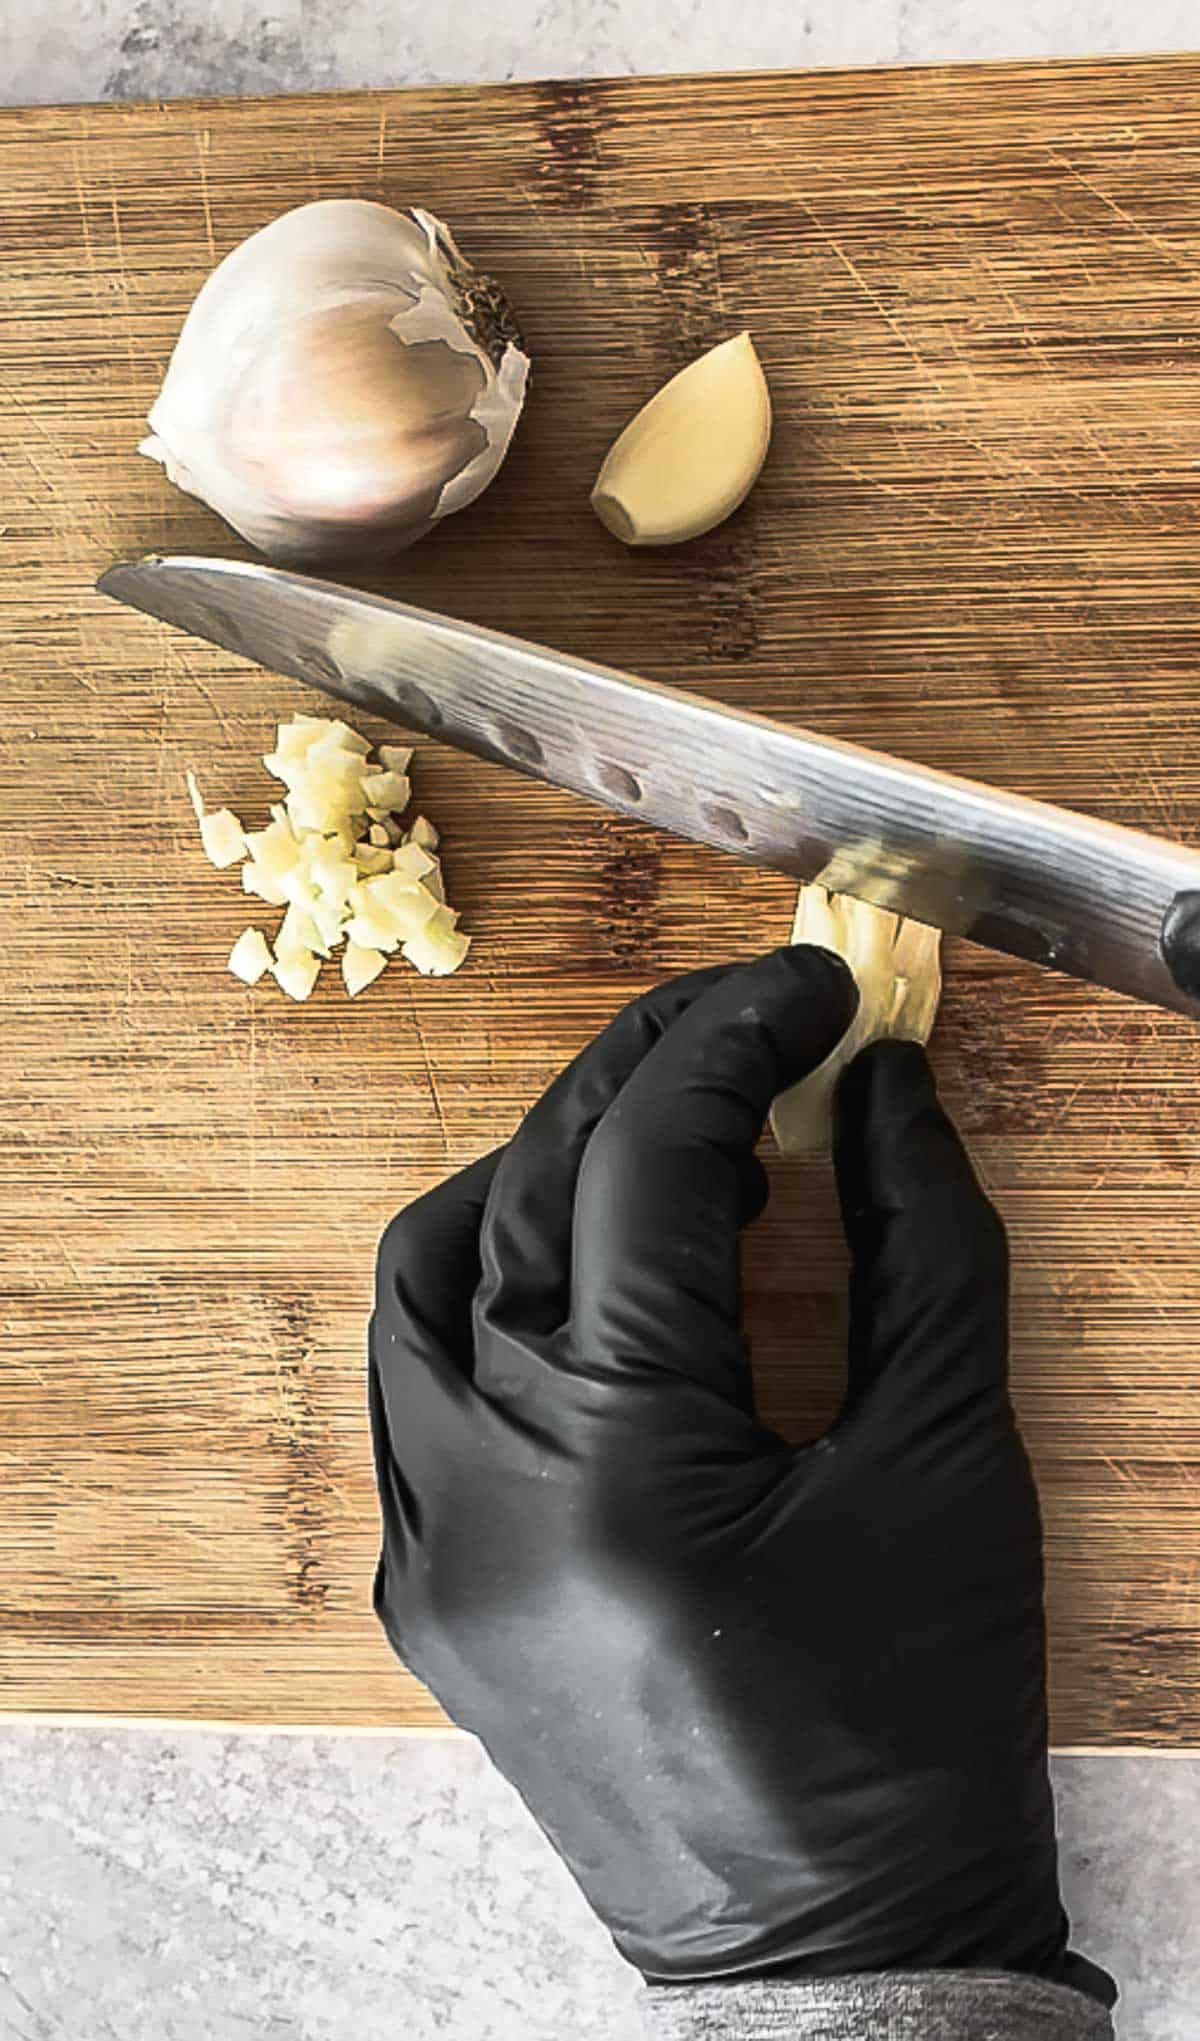 A hand with black gloves mincing fresh garlic on top of a wooden cutting board with a pile of minced garlic and a whole garlic bulb on the side.